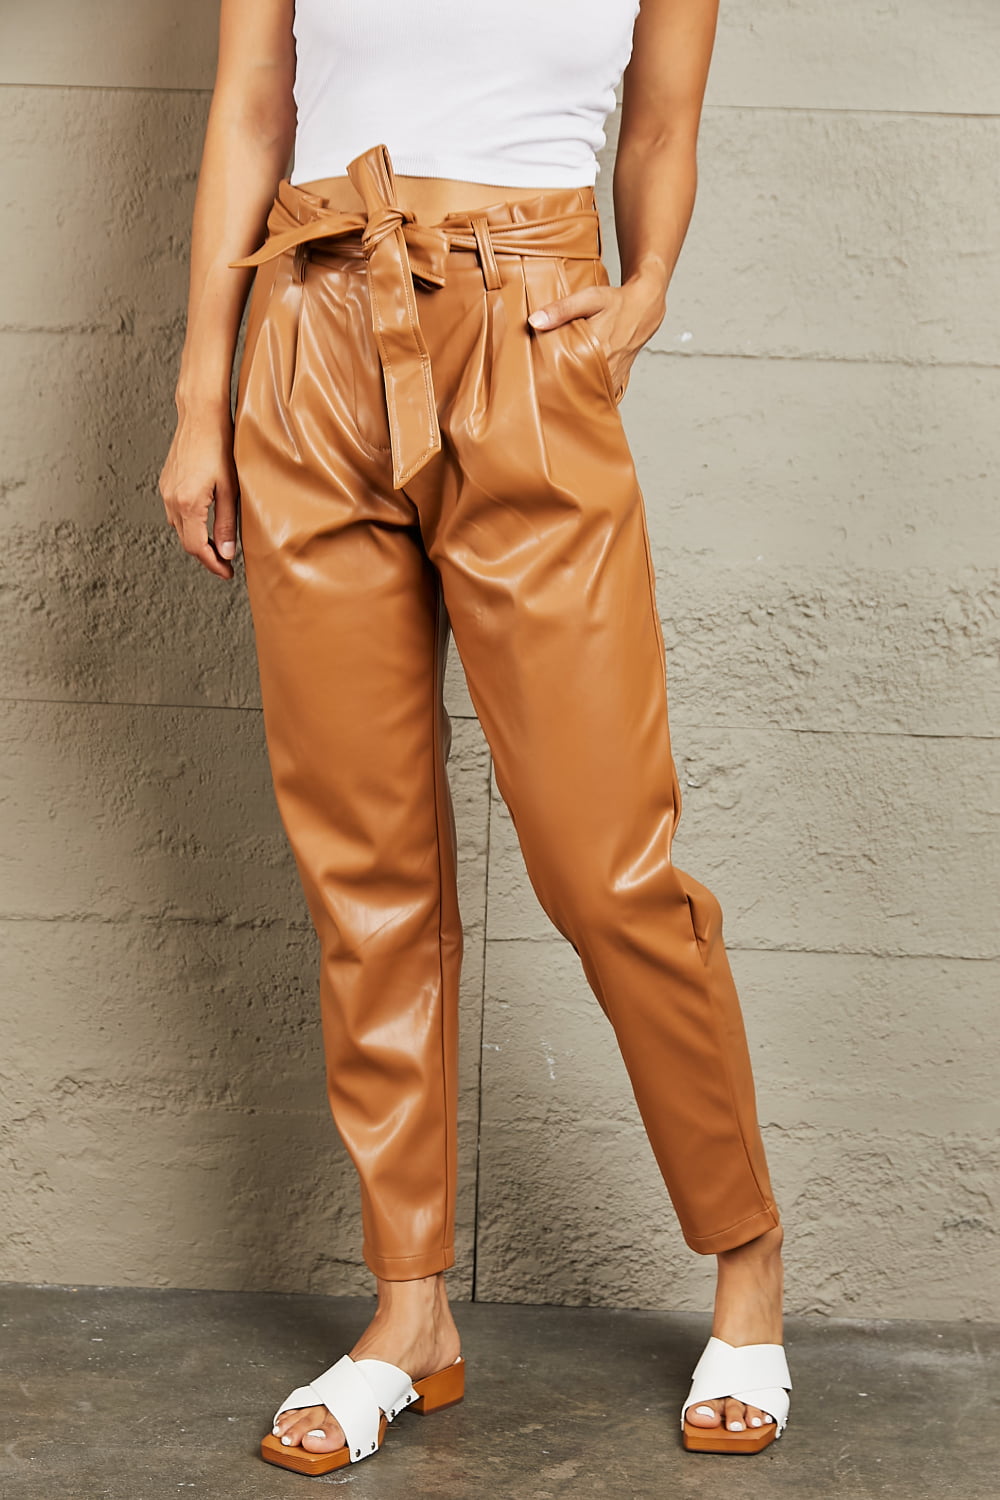 HEYSON Powerful You Full Size Faux Leather Paperbag Waist Pants Bottom wear